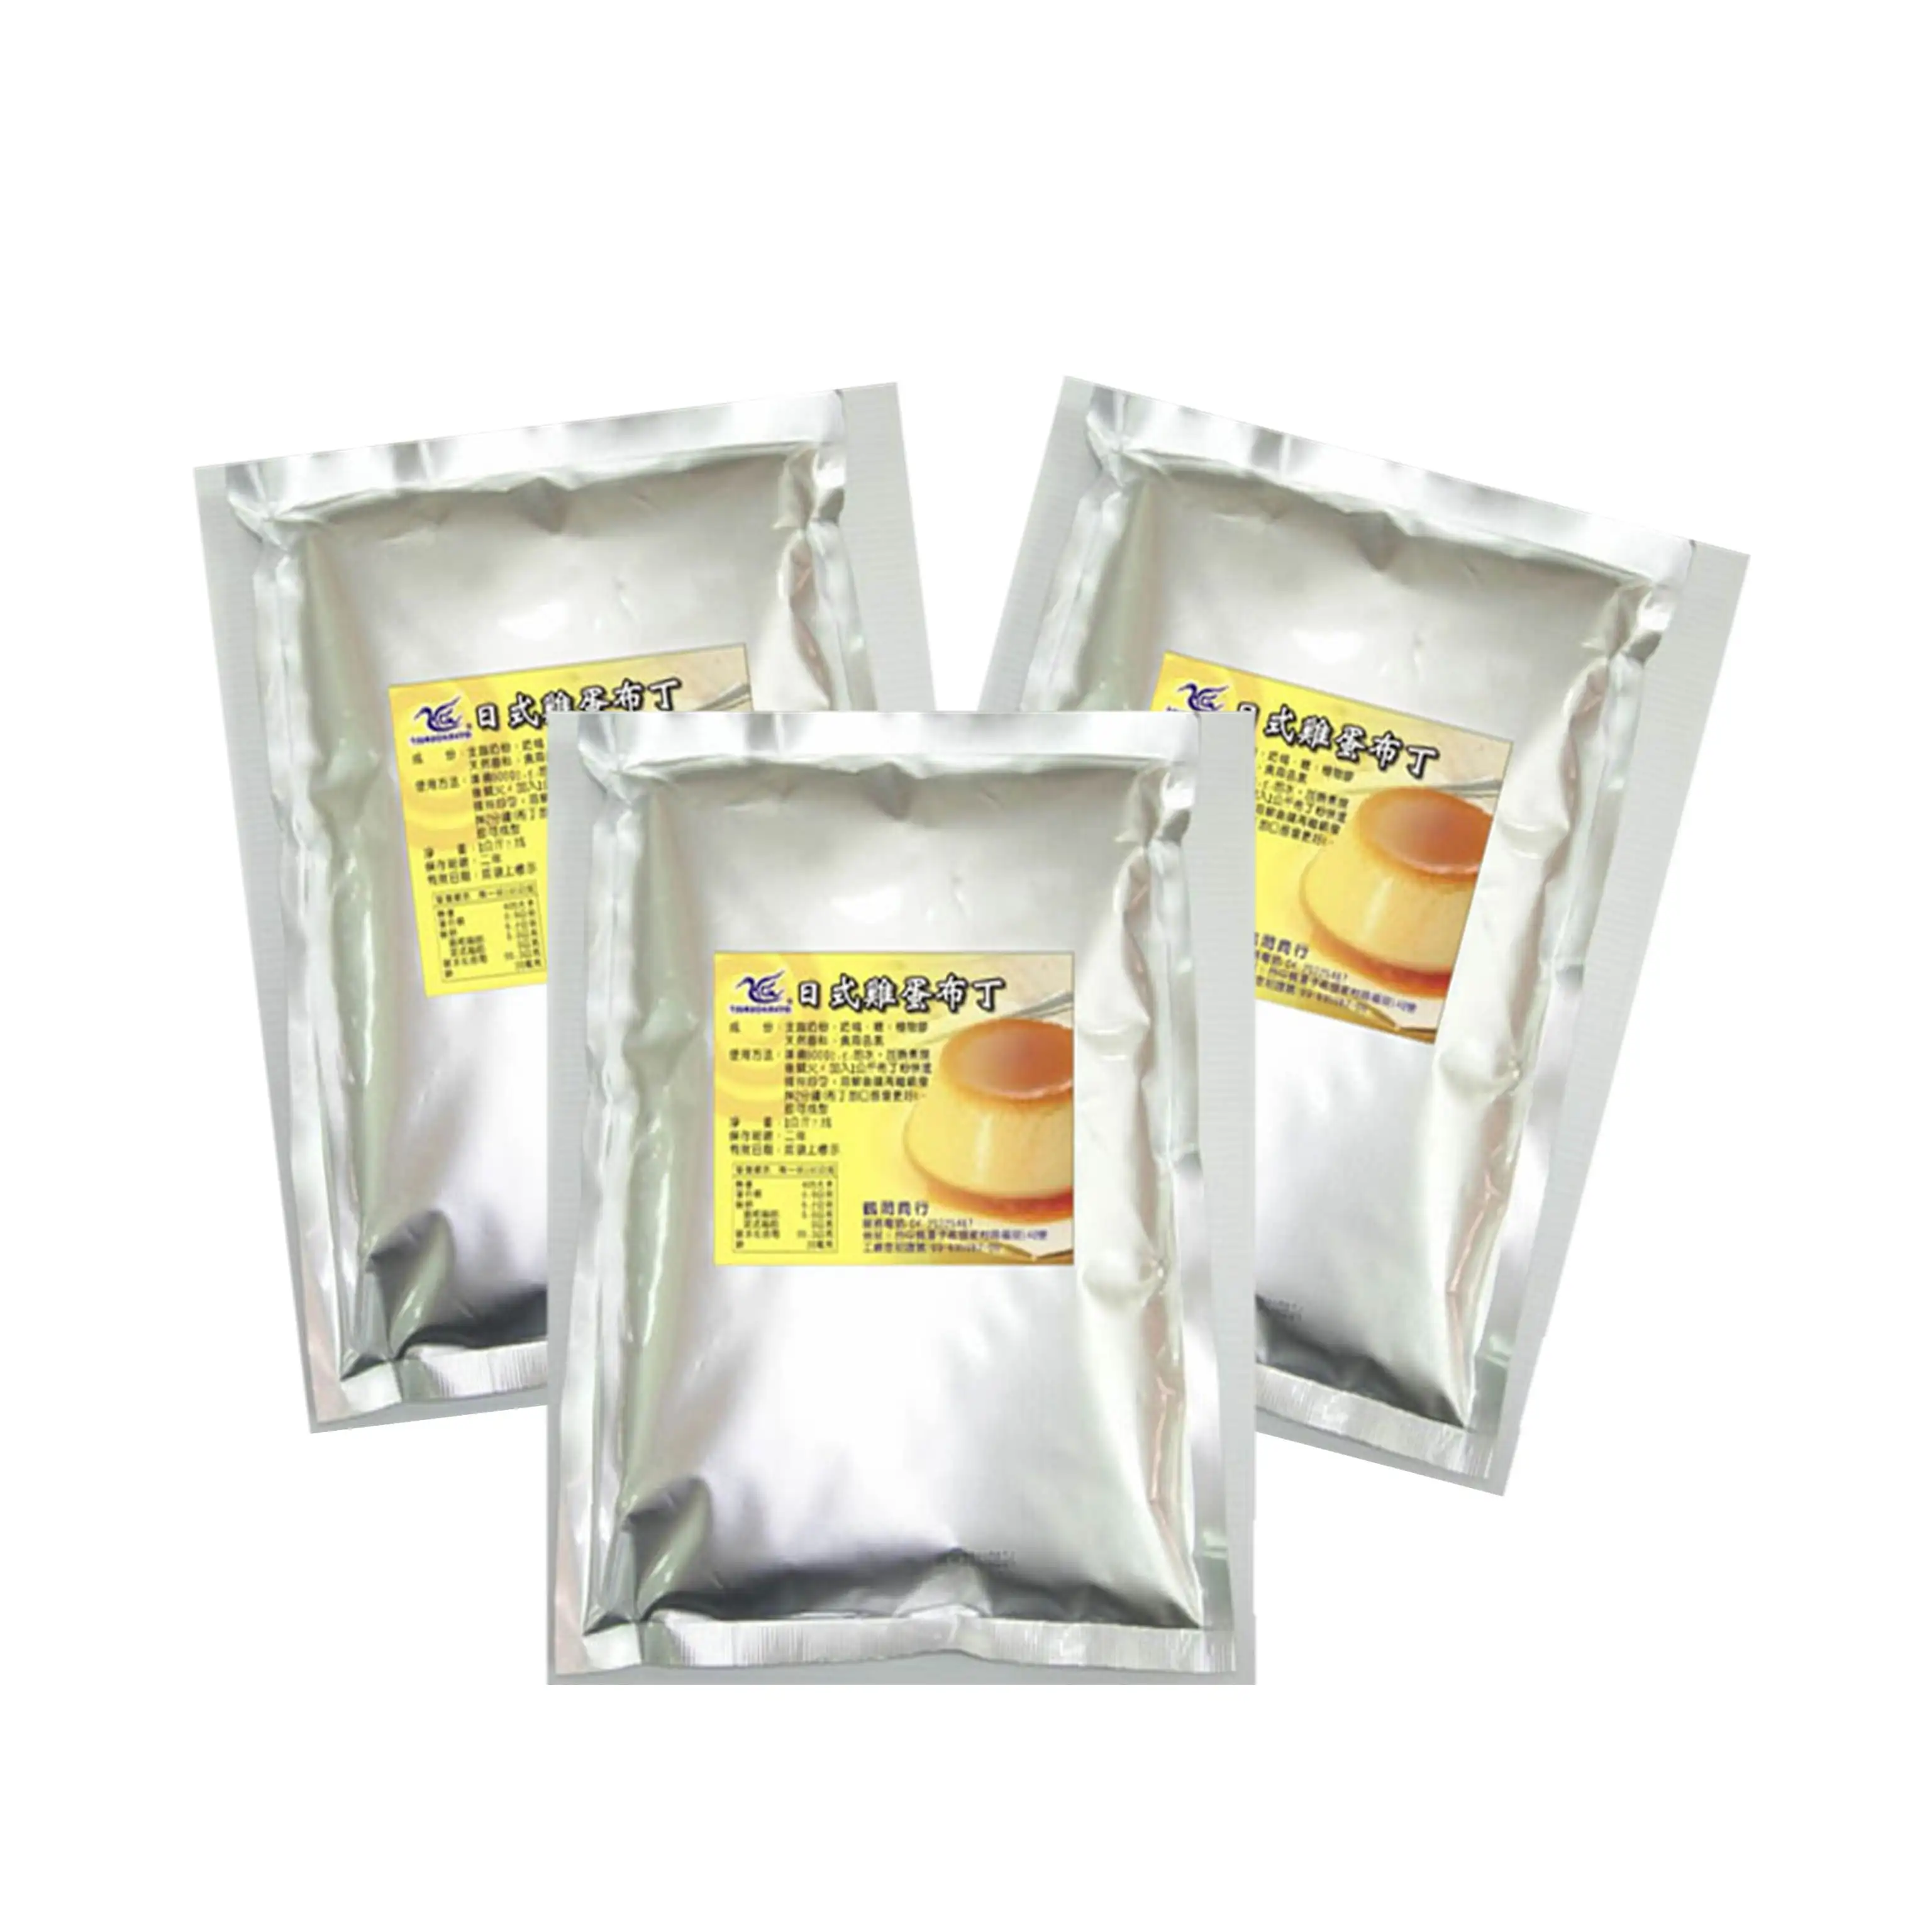 Egg flavor jelly pudding powder for drinks